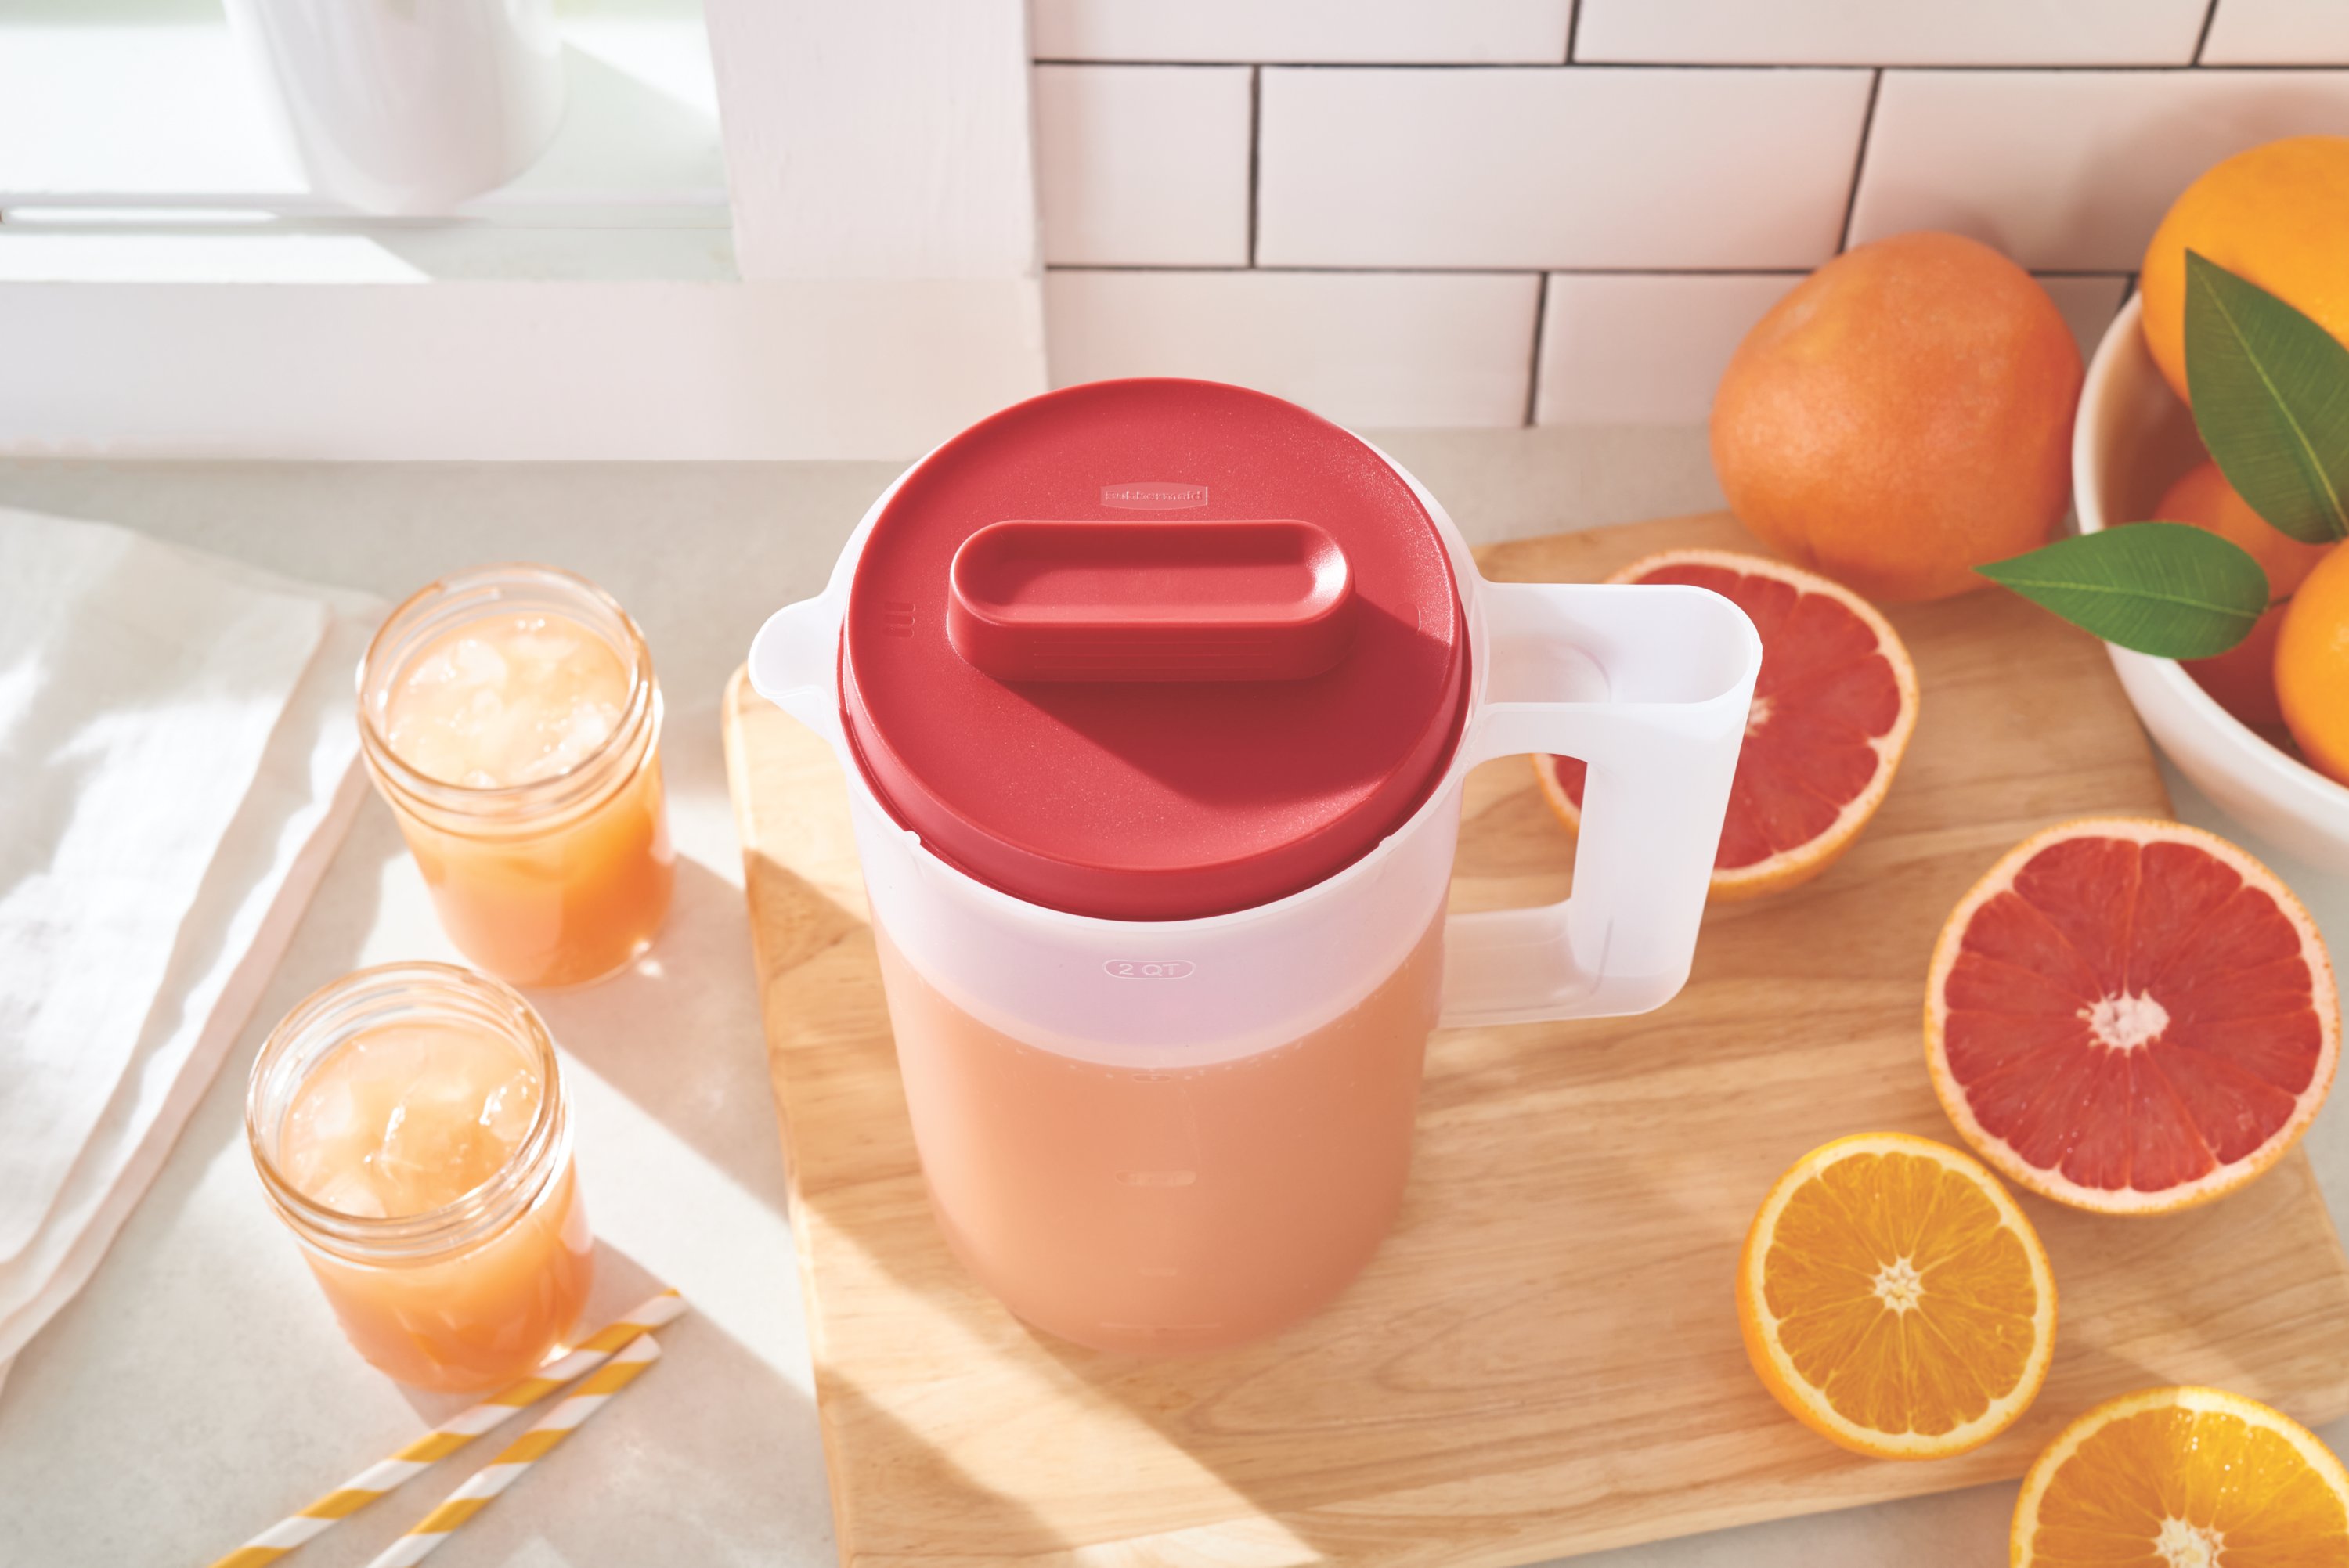 https://s7d9.scene7.com/is/image/NewellRubbermaid/2122587-rubbermaid-food-storage-simply-pour-pitcher-2qt-red-kitchen-with-food-lifestyle-4